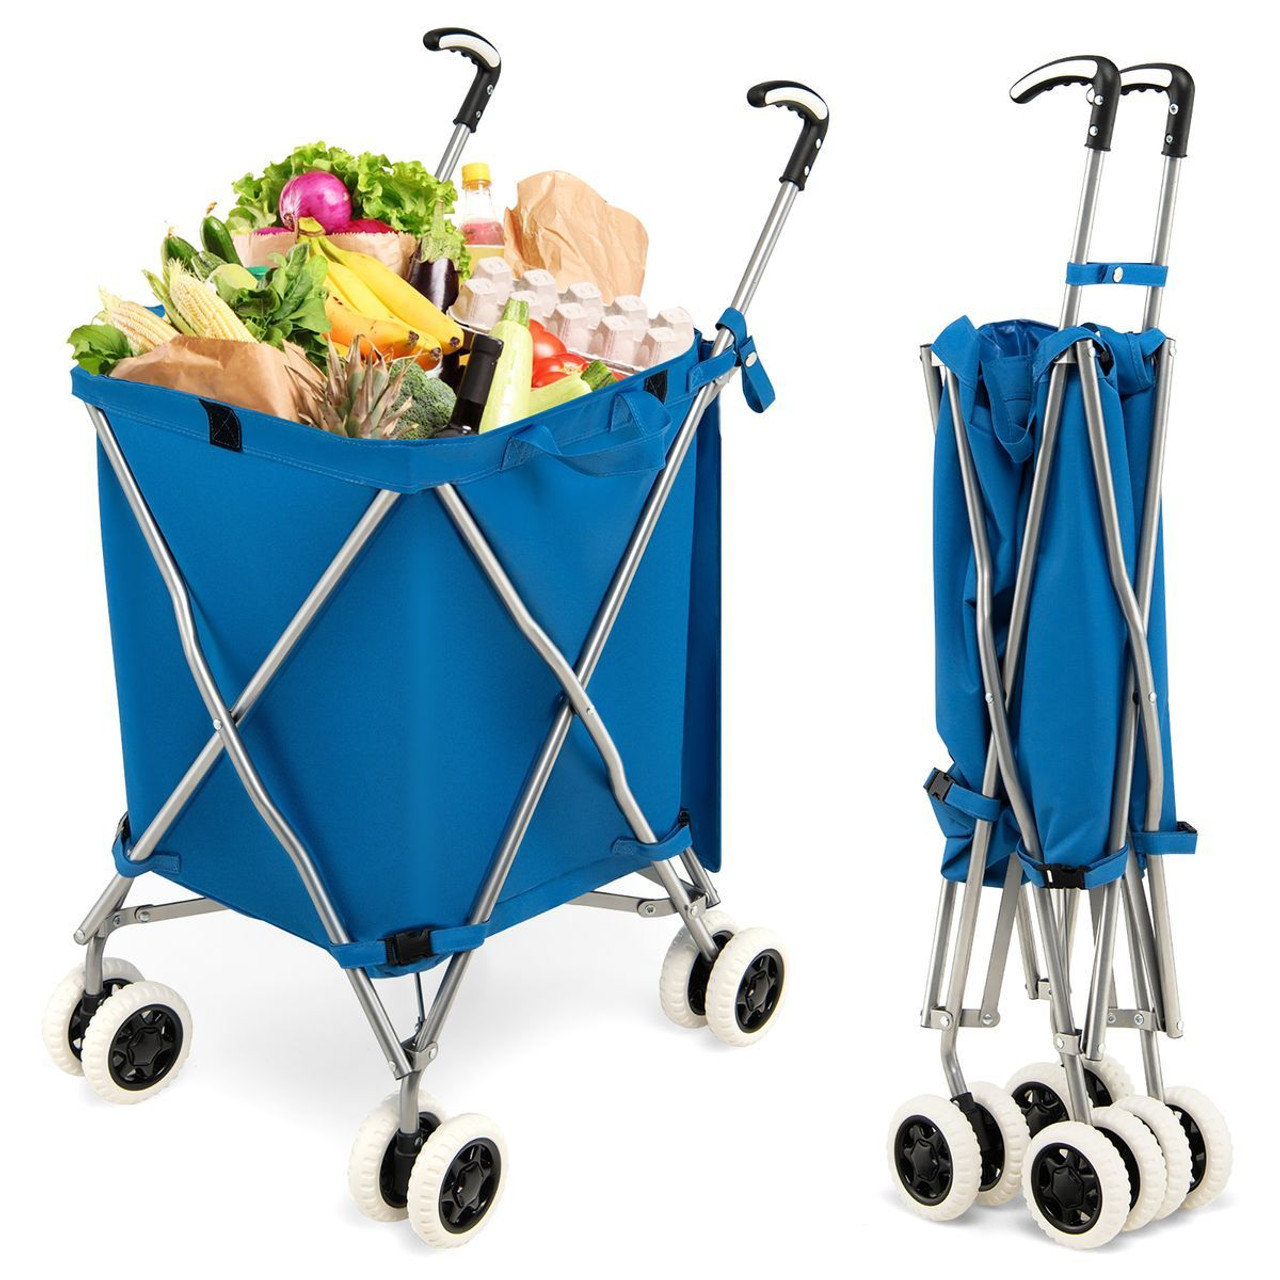 Folding Shopping and Utility Cart, Water-Resistant Heavy-Duty Canvas with Cover product image